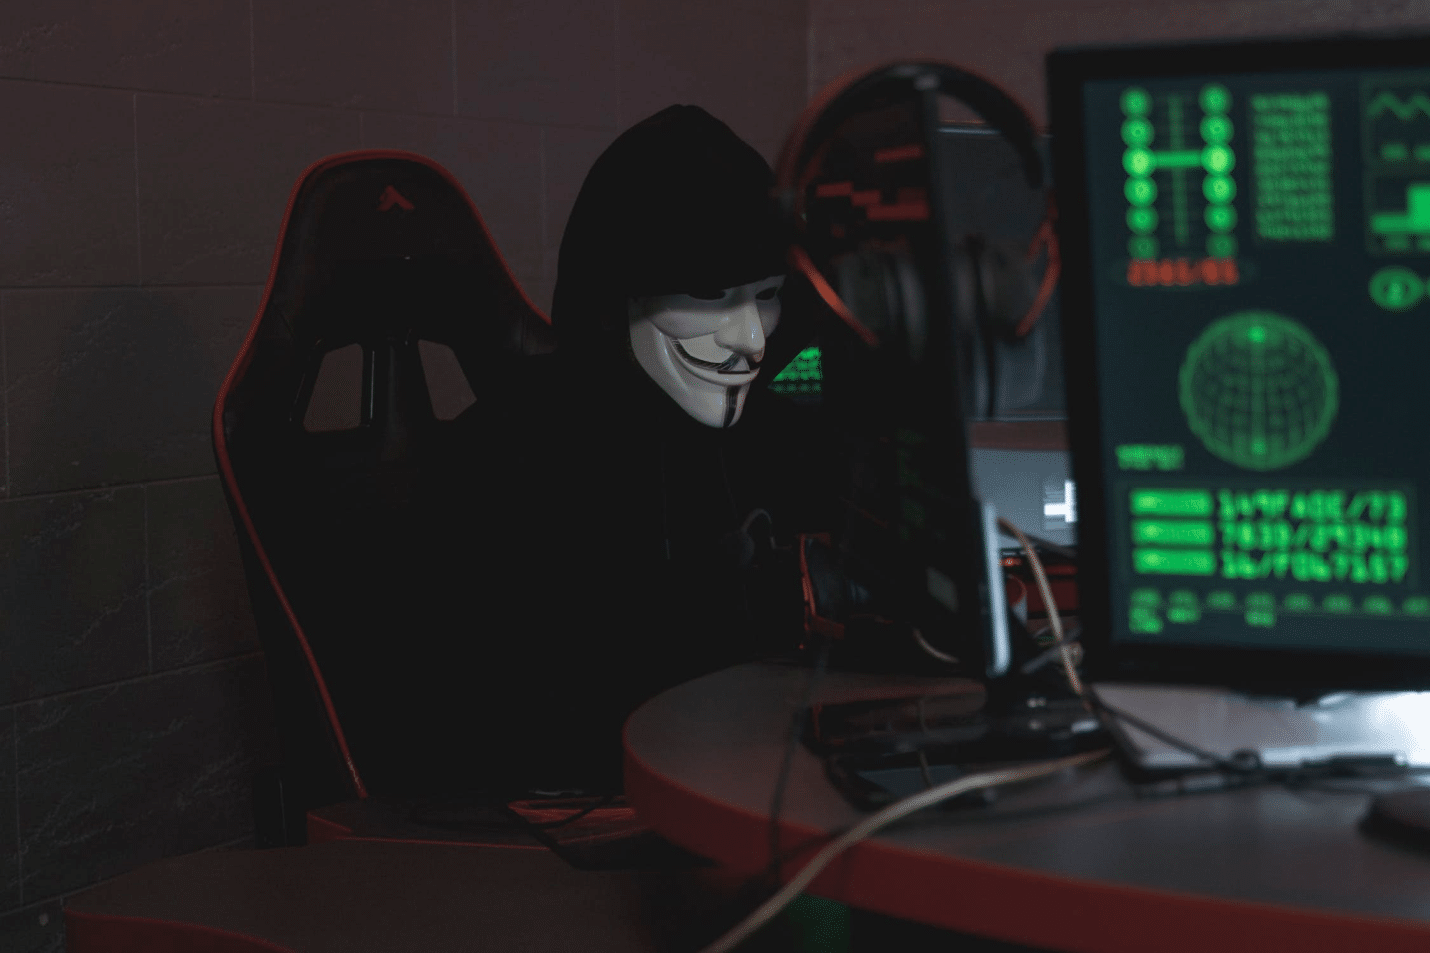 An image of a person using a computer while wearing a Vendetta mask